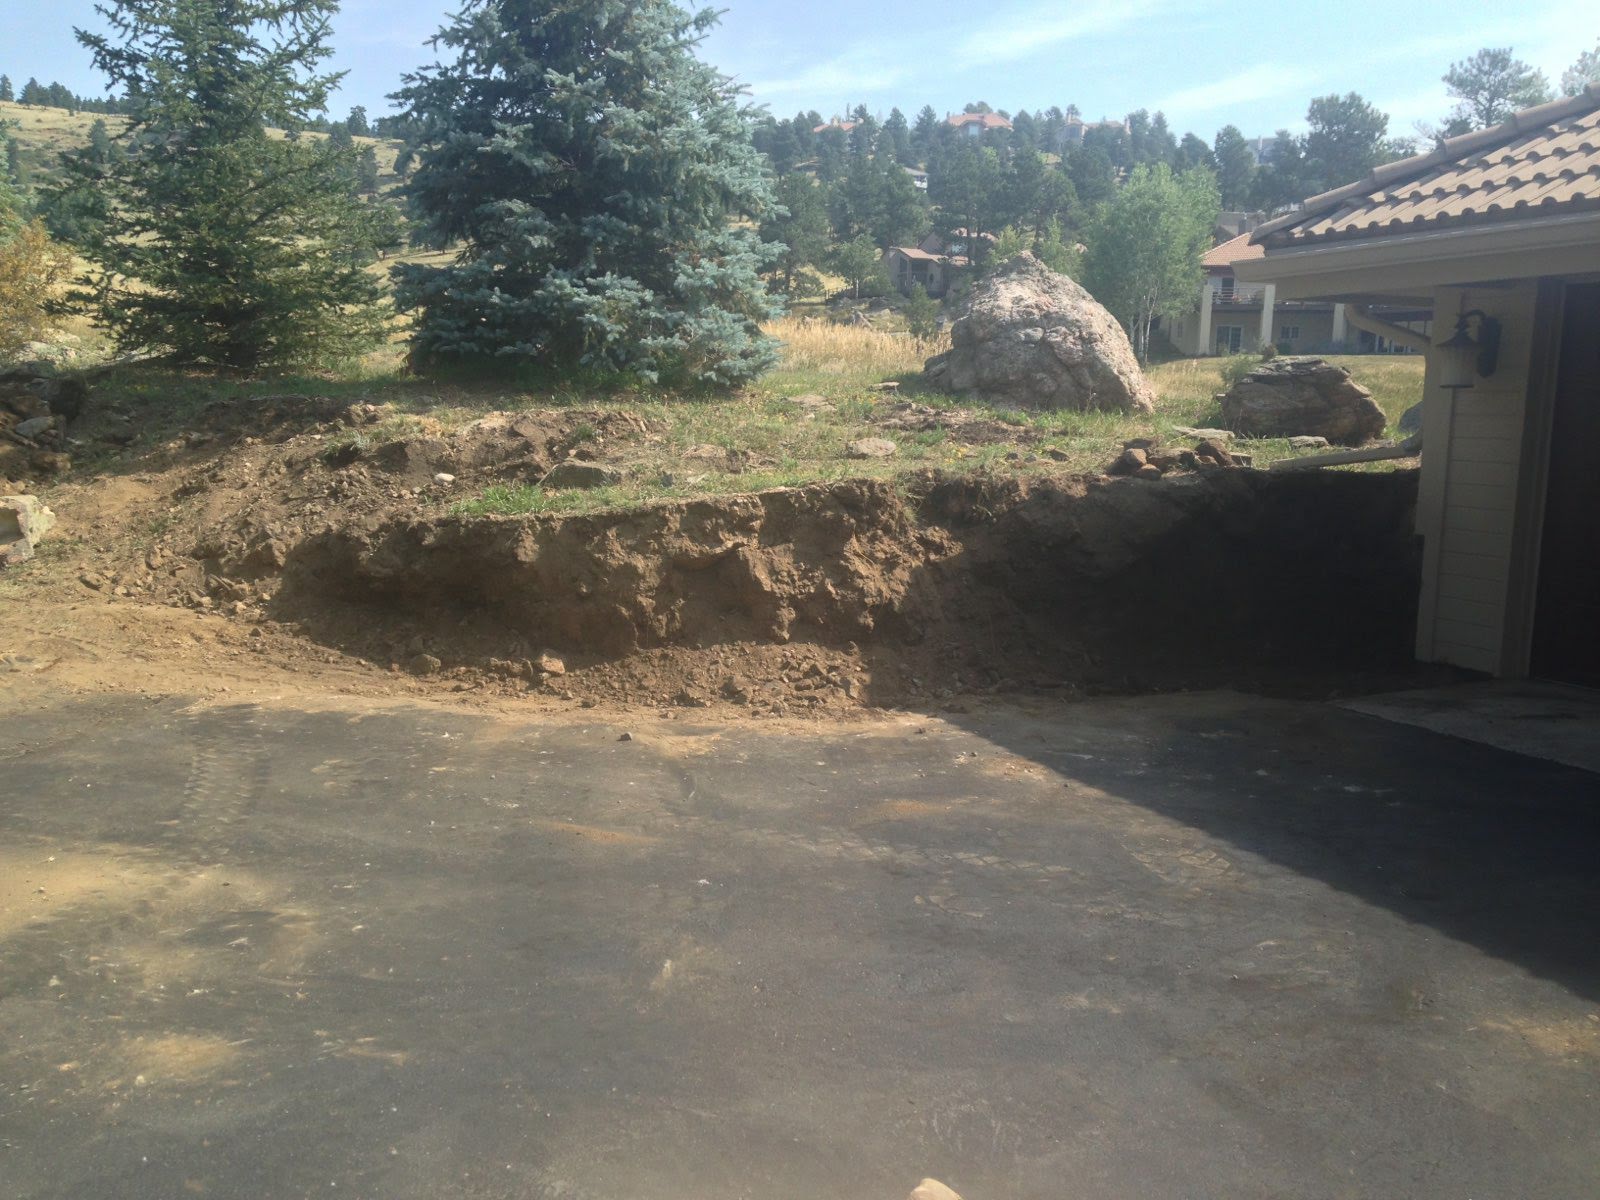 Old retaining wall removed, showing bare dirt next to garage